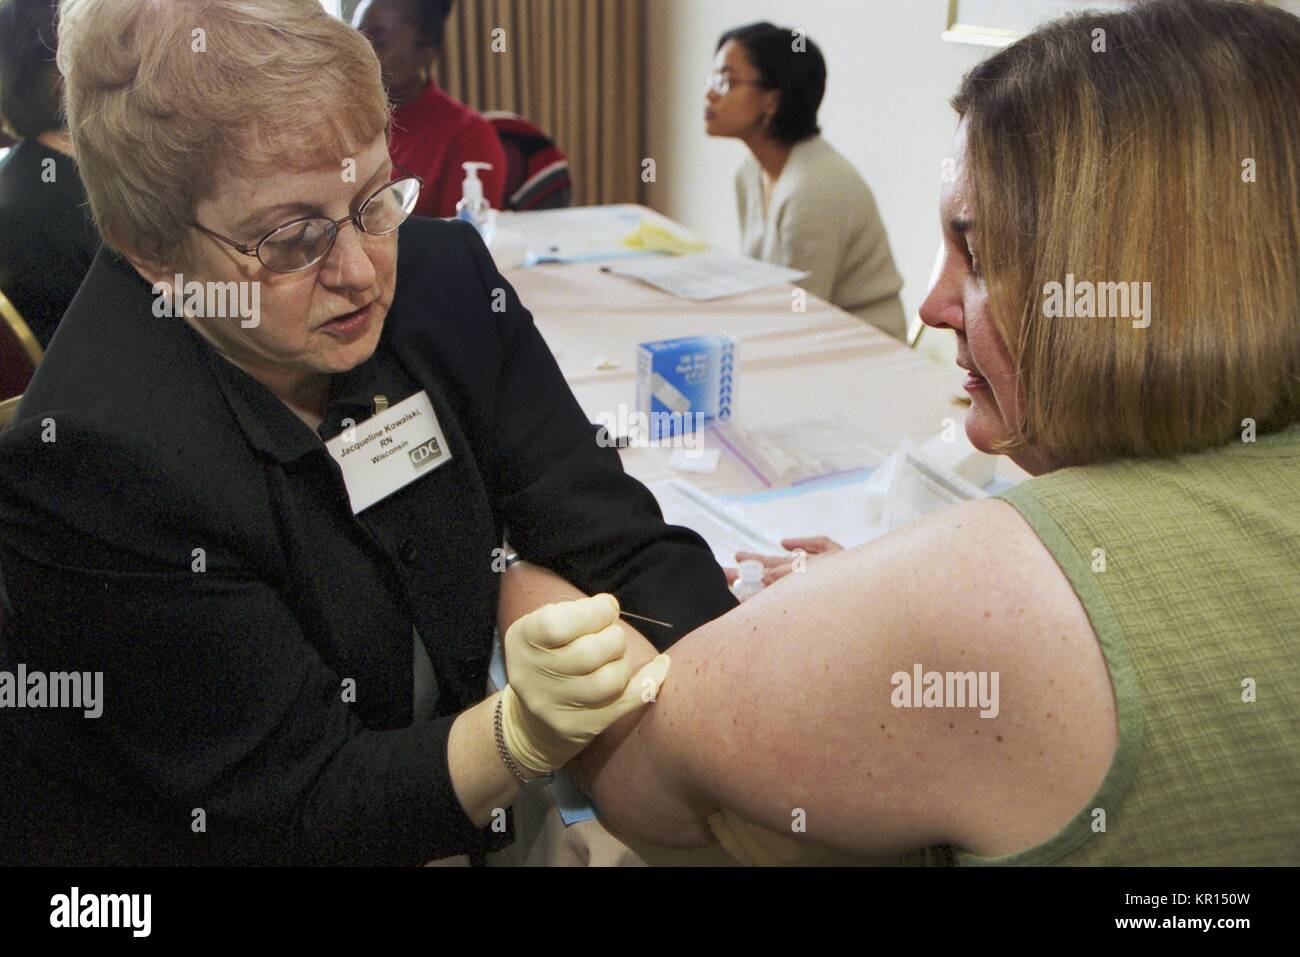 Jacqueline Kowalski (Left) and Lorna Will practice proper technique with a bifurcated needle used during smallpox vaccination, 2002. In December 2002, CDC Clinicians trained state licensed vaccine administers how to deliver smallpox vaccine safely and efficiently. Once training was completed, they provided additional smallpox vaccine administration training in their home states. Image courtesy CDC. Stock Photo